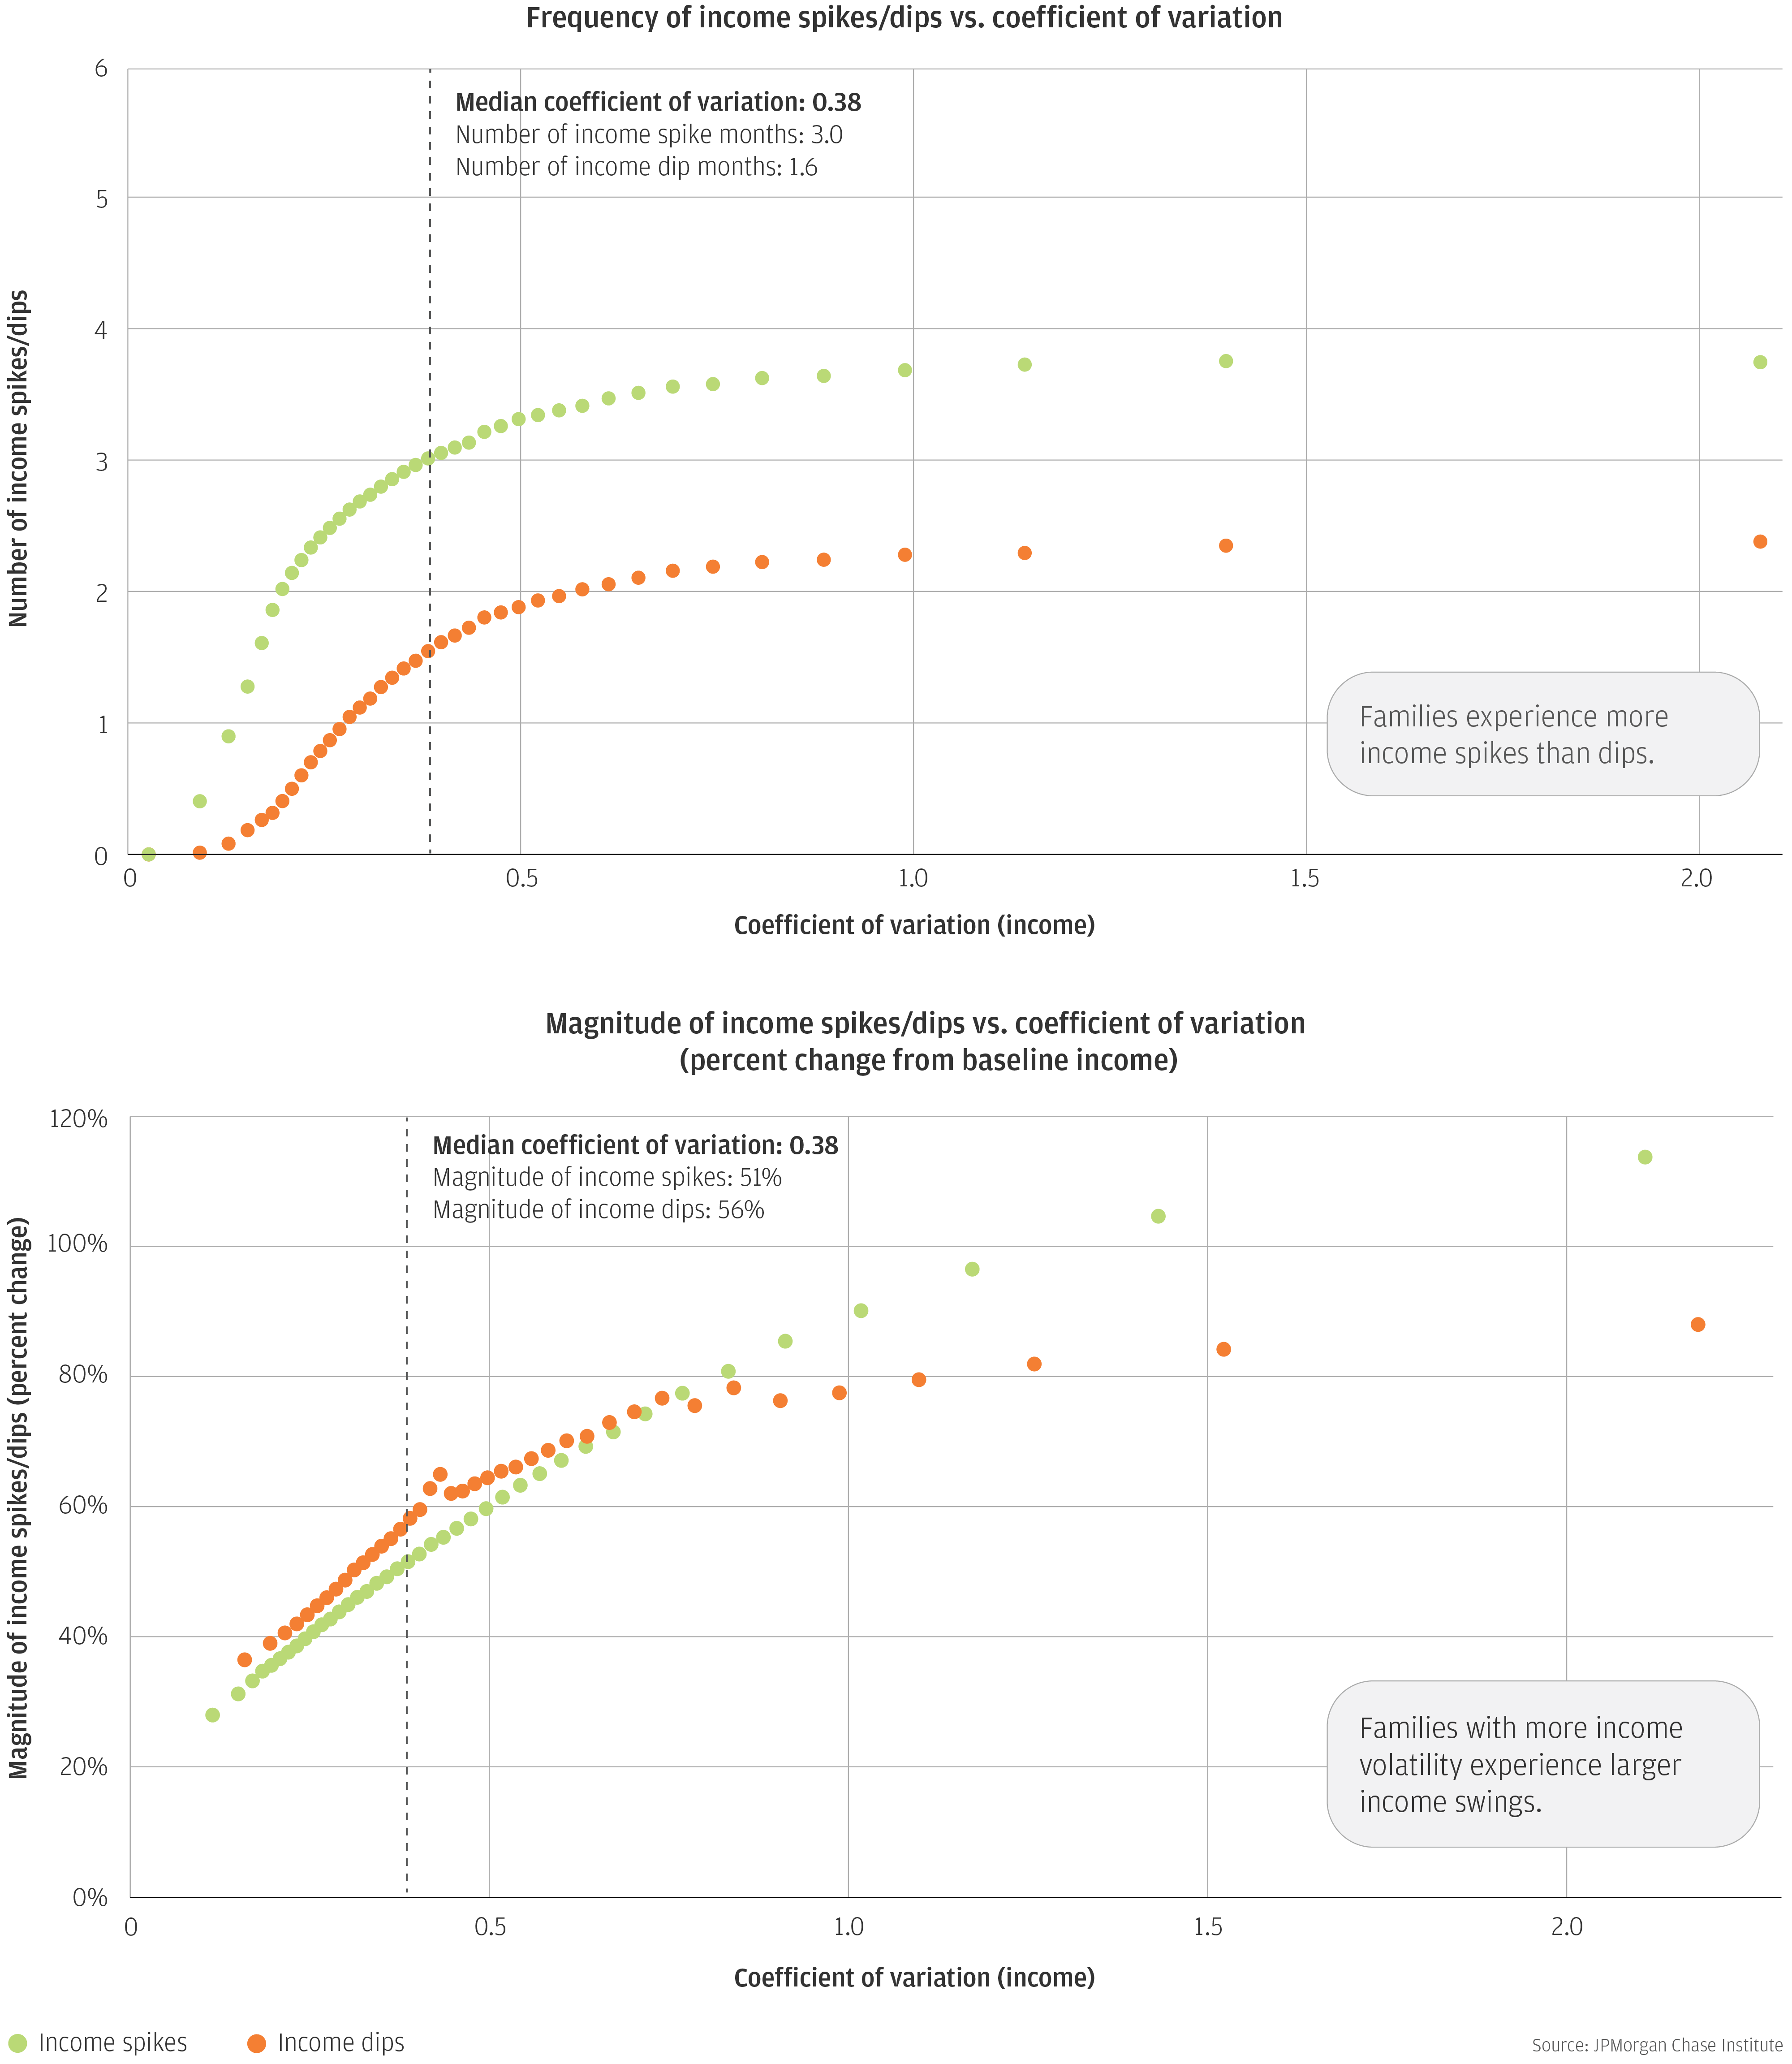 Line graph1 describes about Frequency of income spikes/dips vs. coefficient of variation and Line graph2 describes about Magnitude of income spikes/dips vs. coefficient of variation (percent change from baseline income)